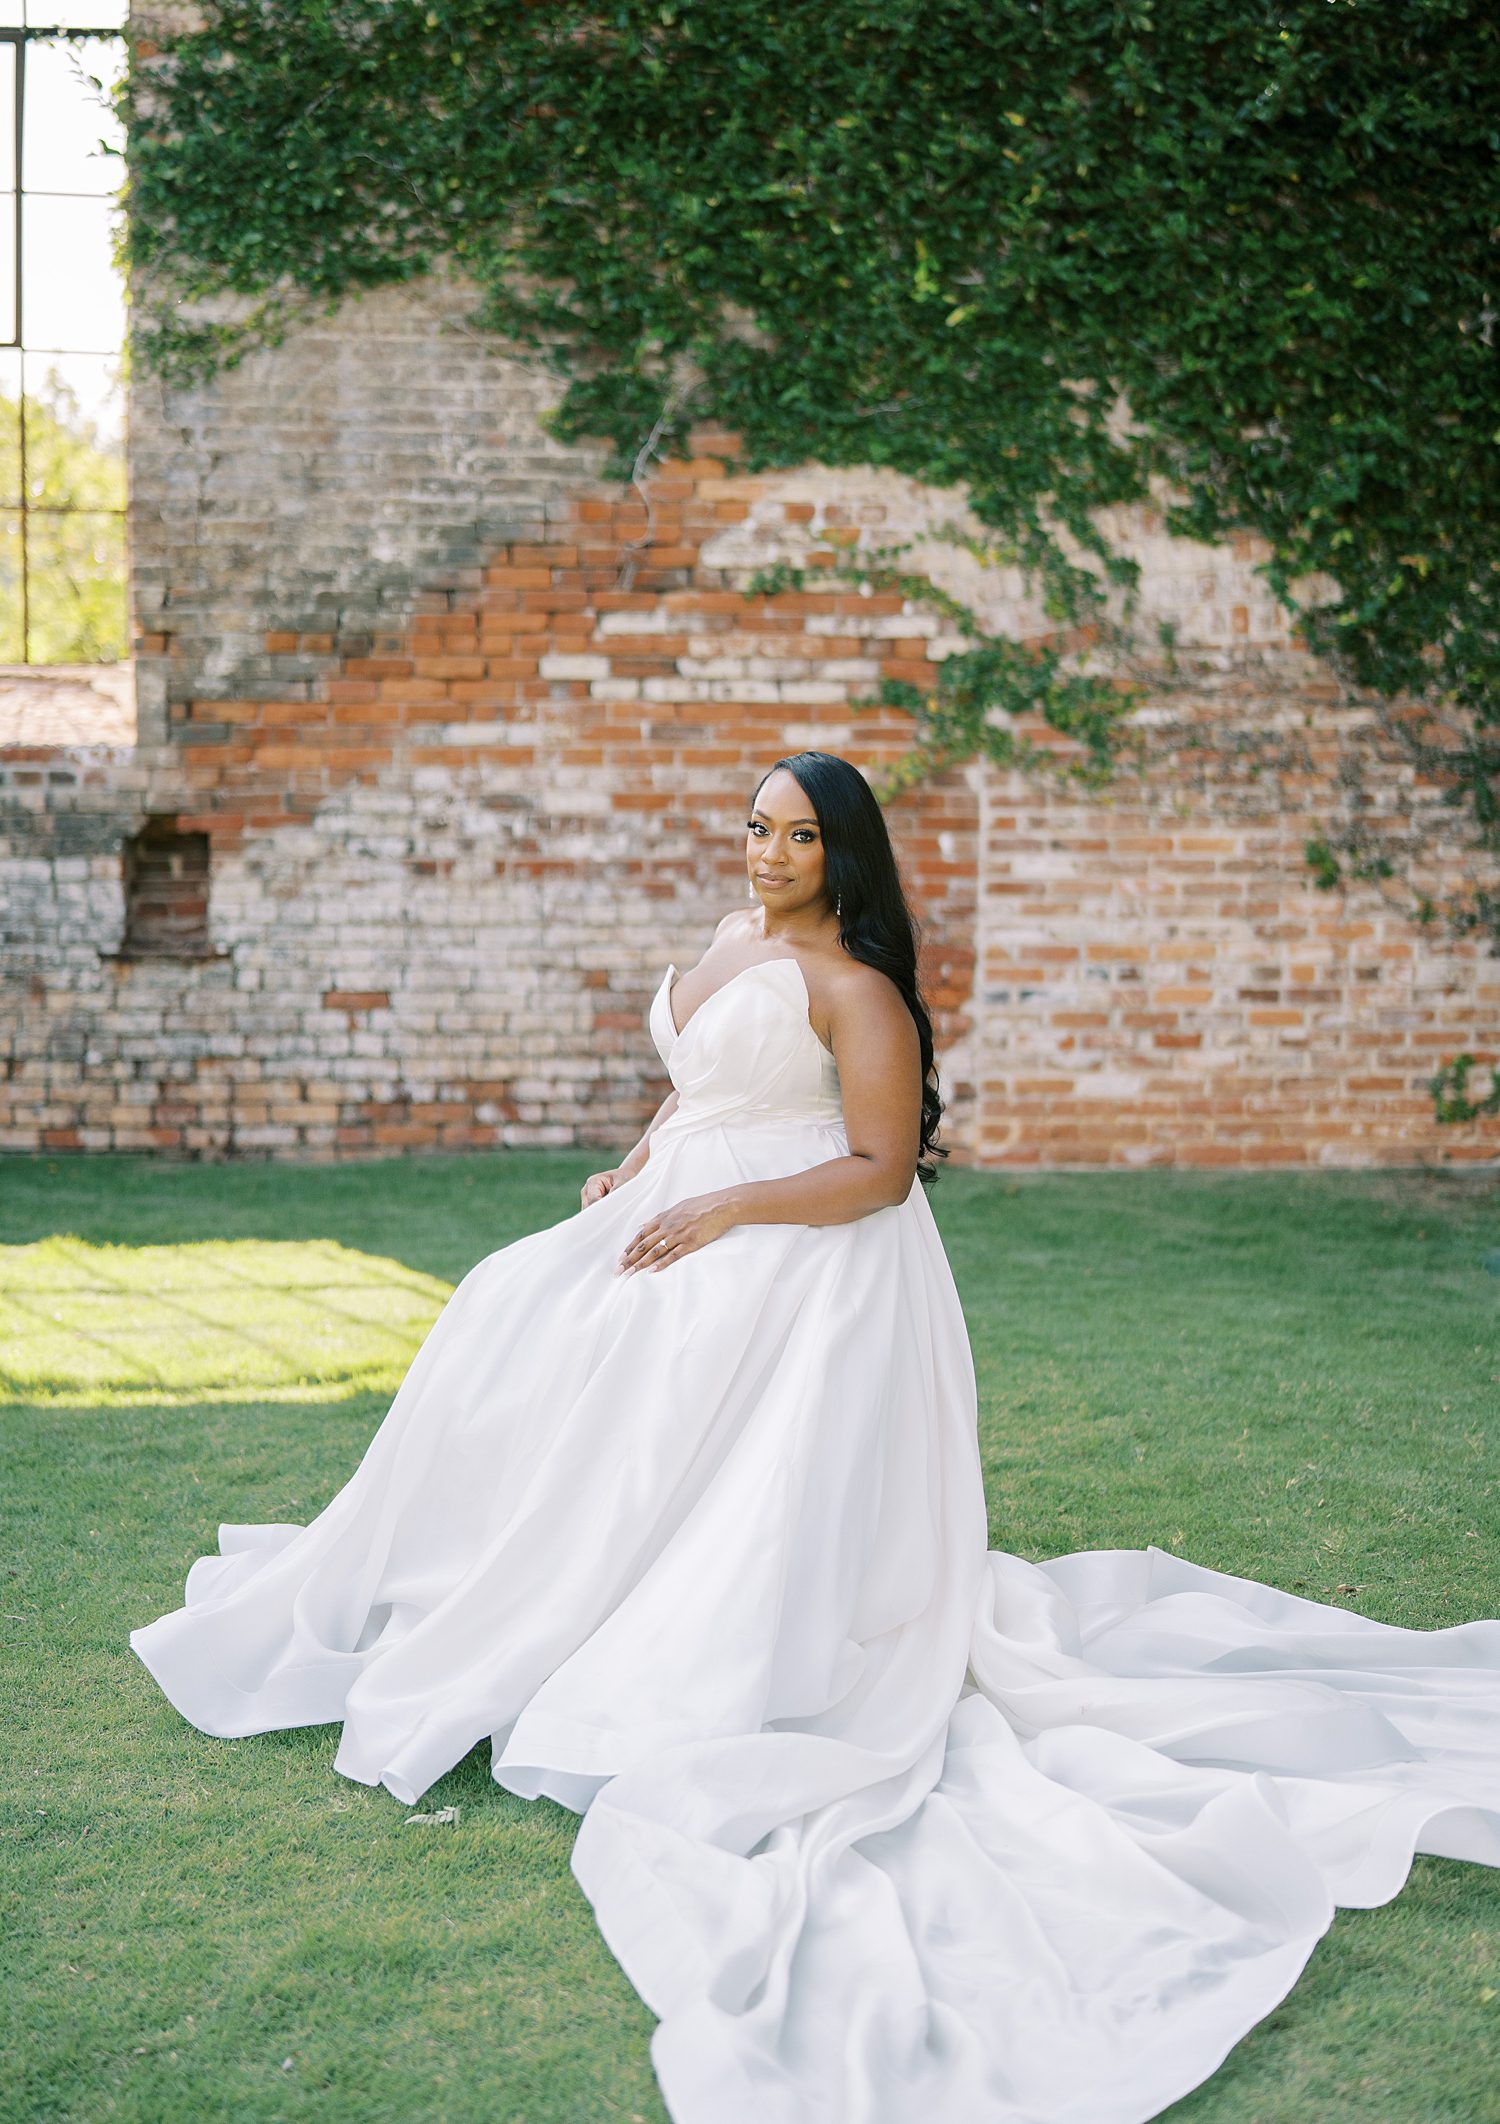 bride turns in strapless wedding gown by brick wall at The Bibb Mill Event Center